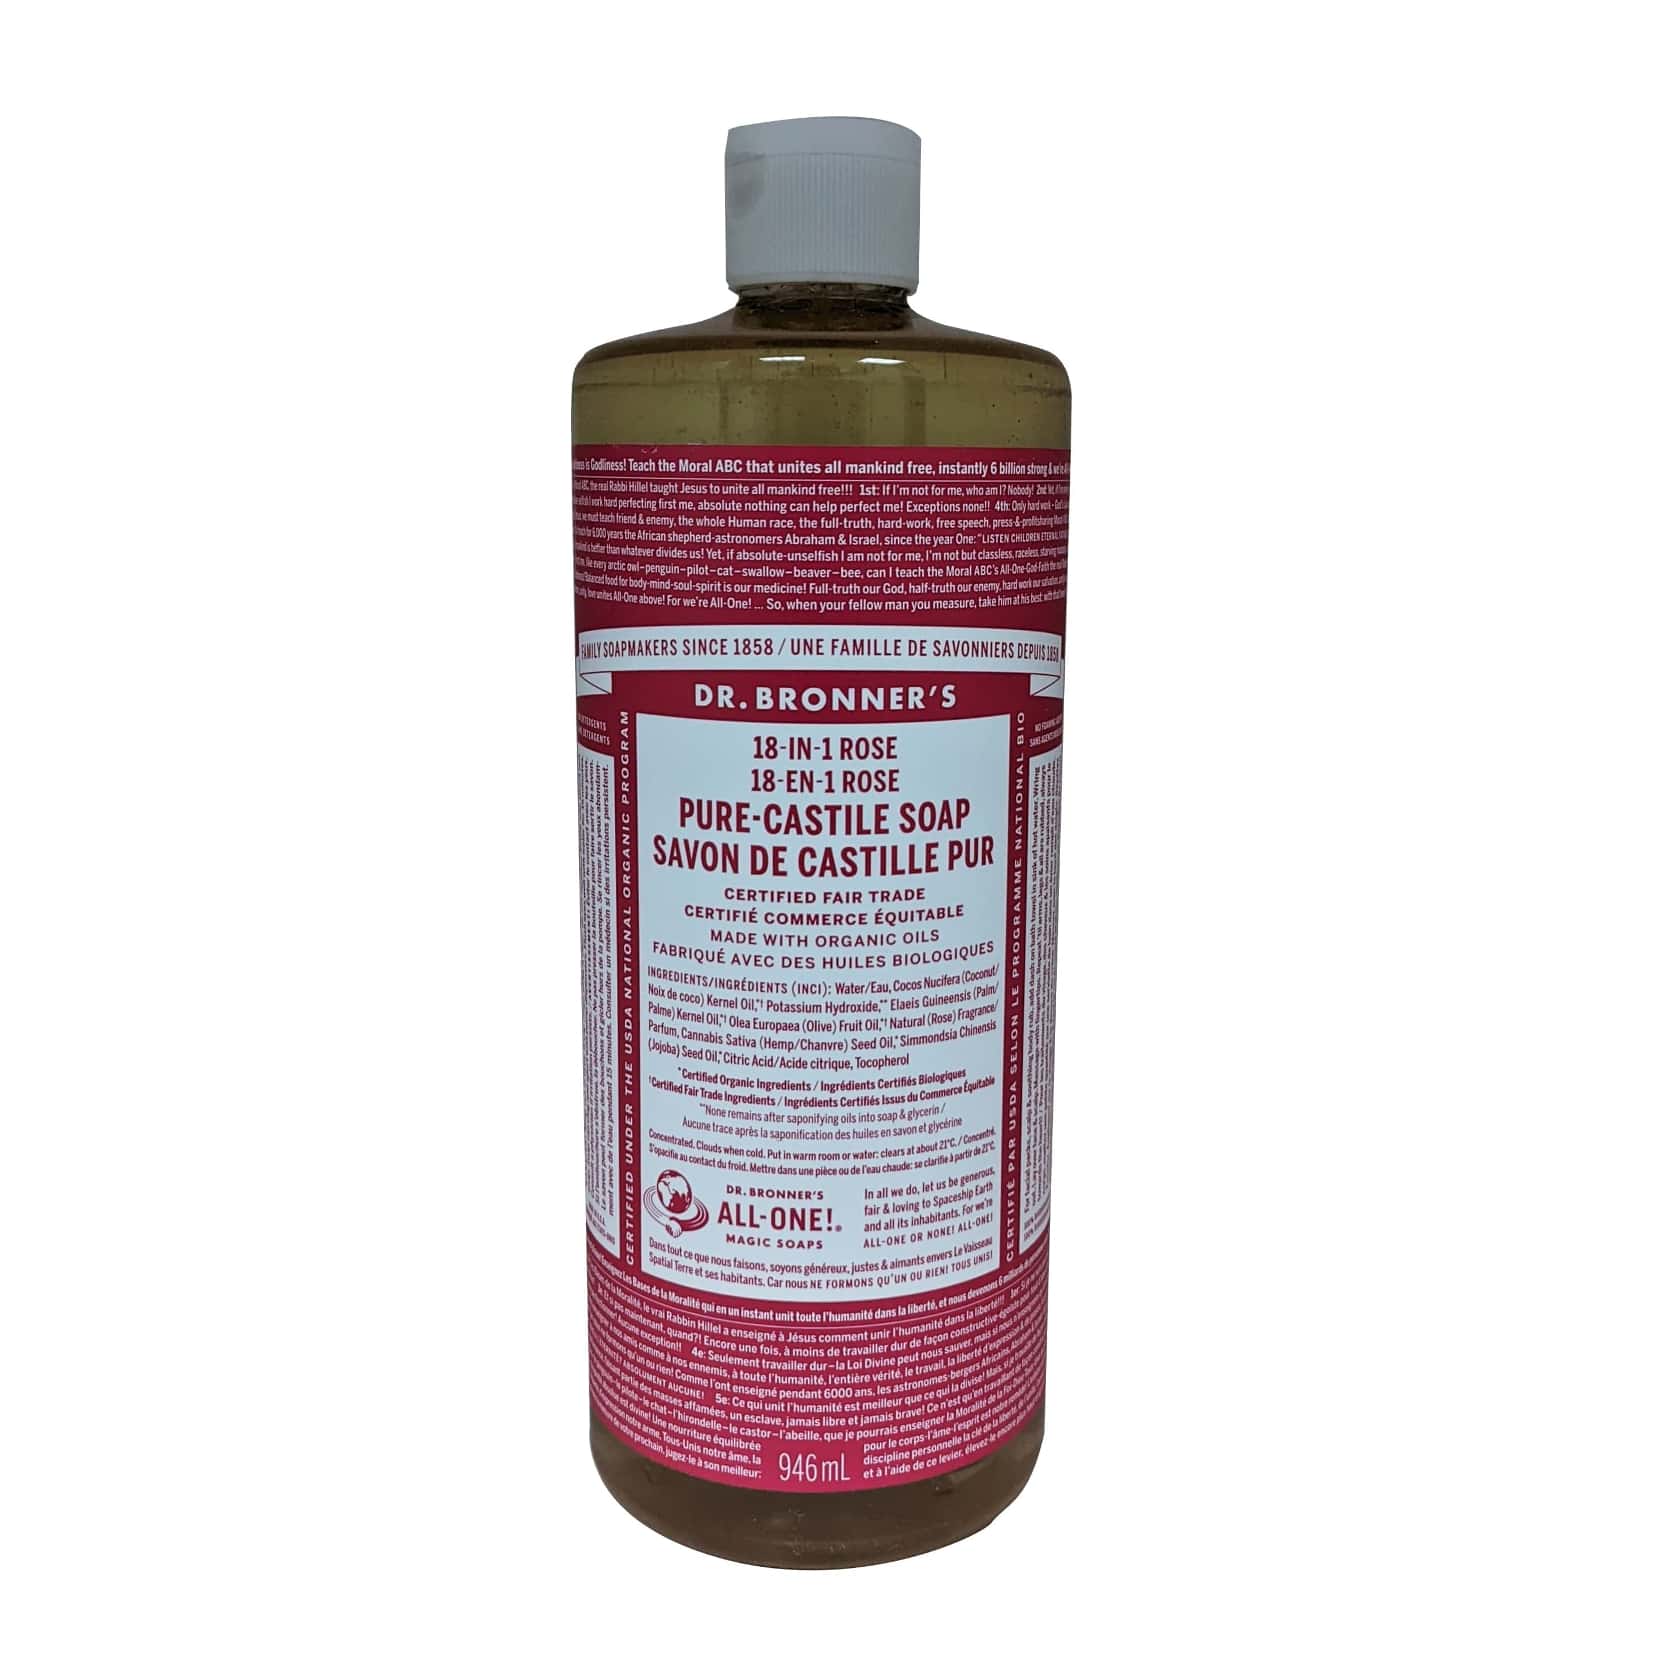 Product label for Dr. Bronner's Rose Pure Castile Liquid Soap